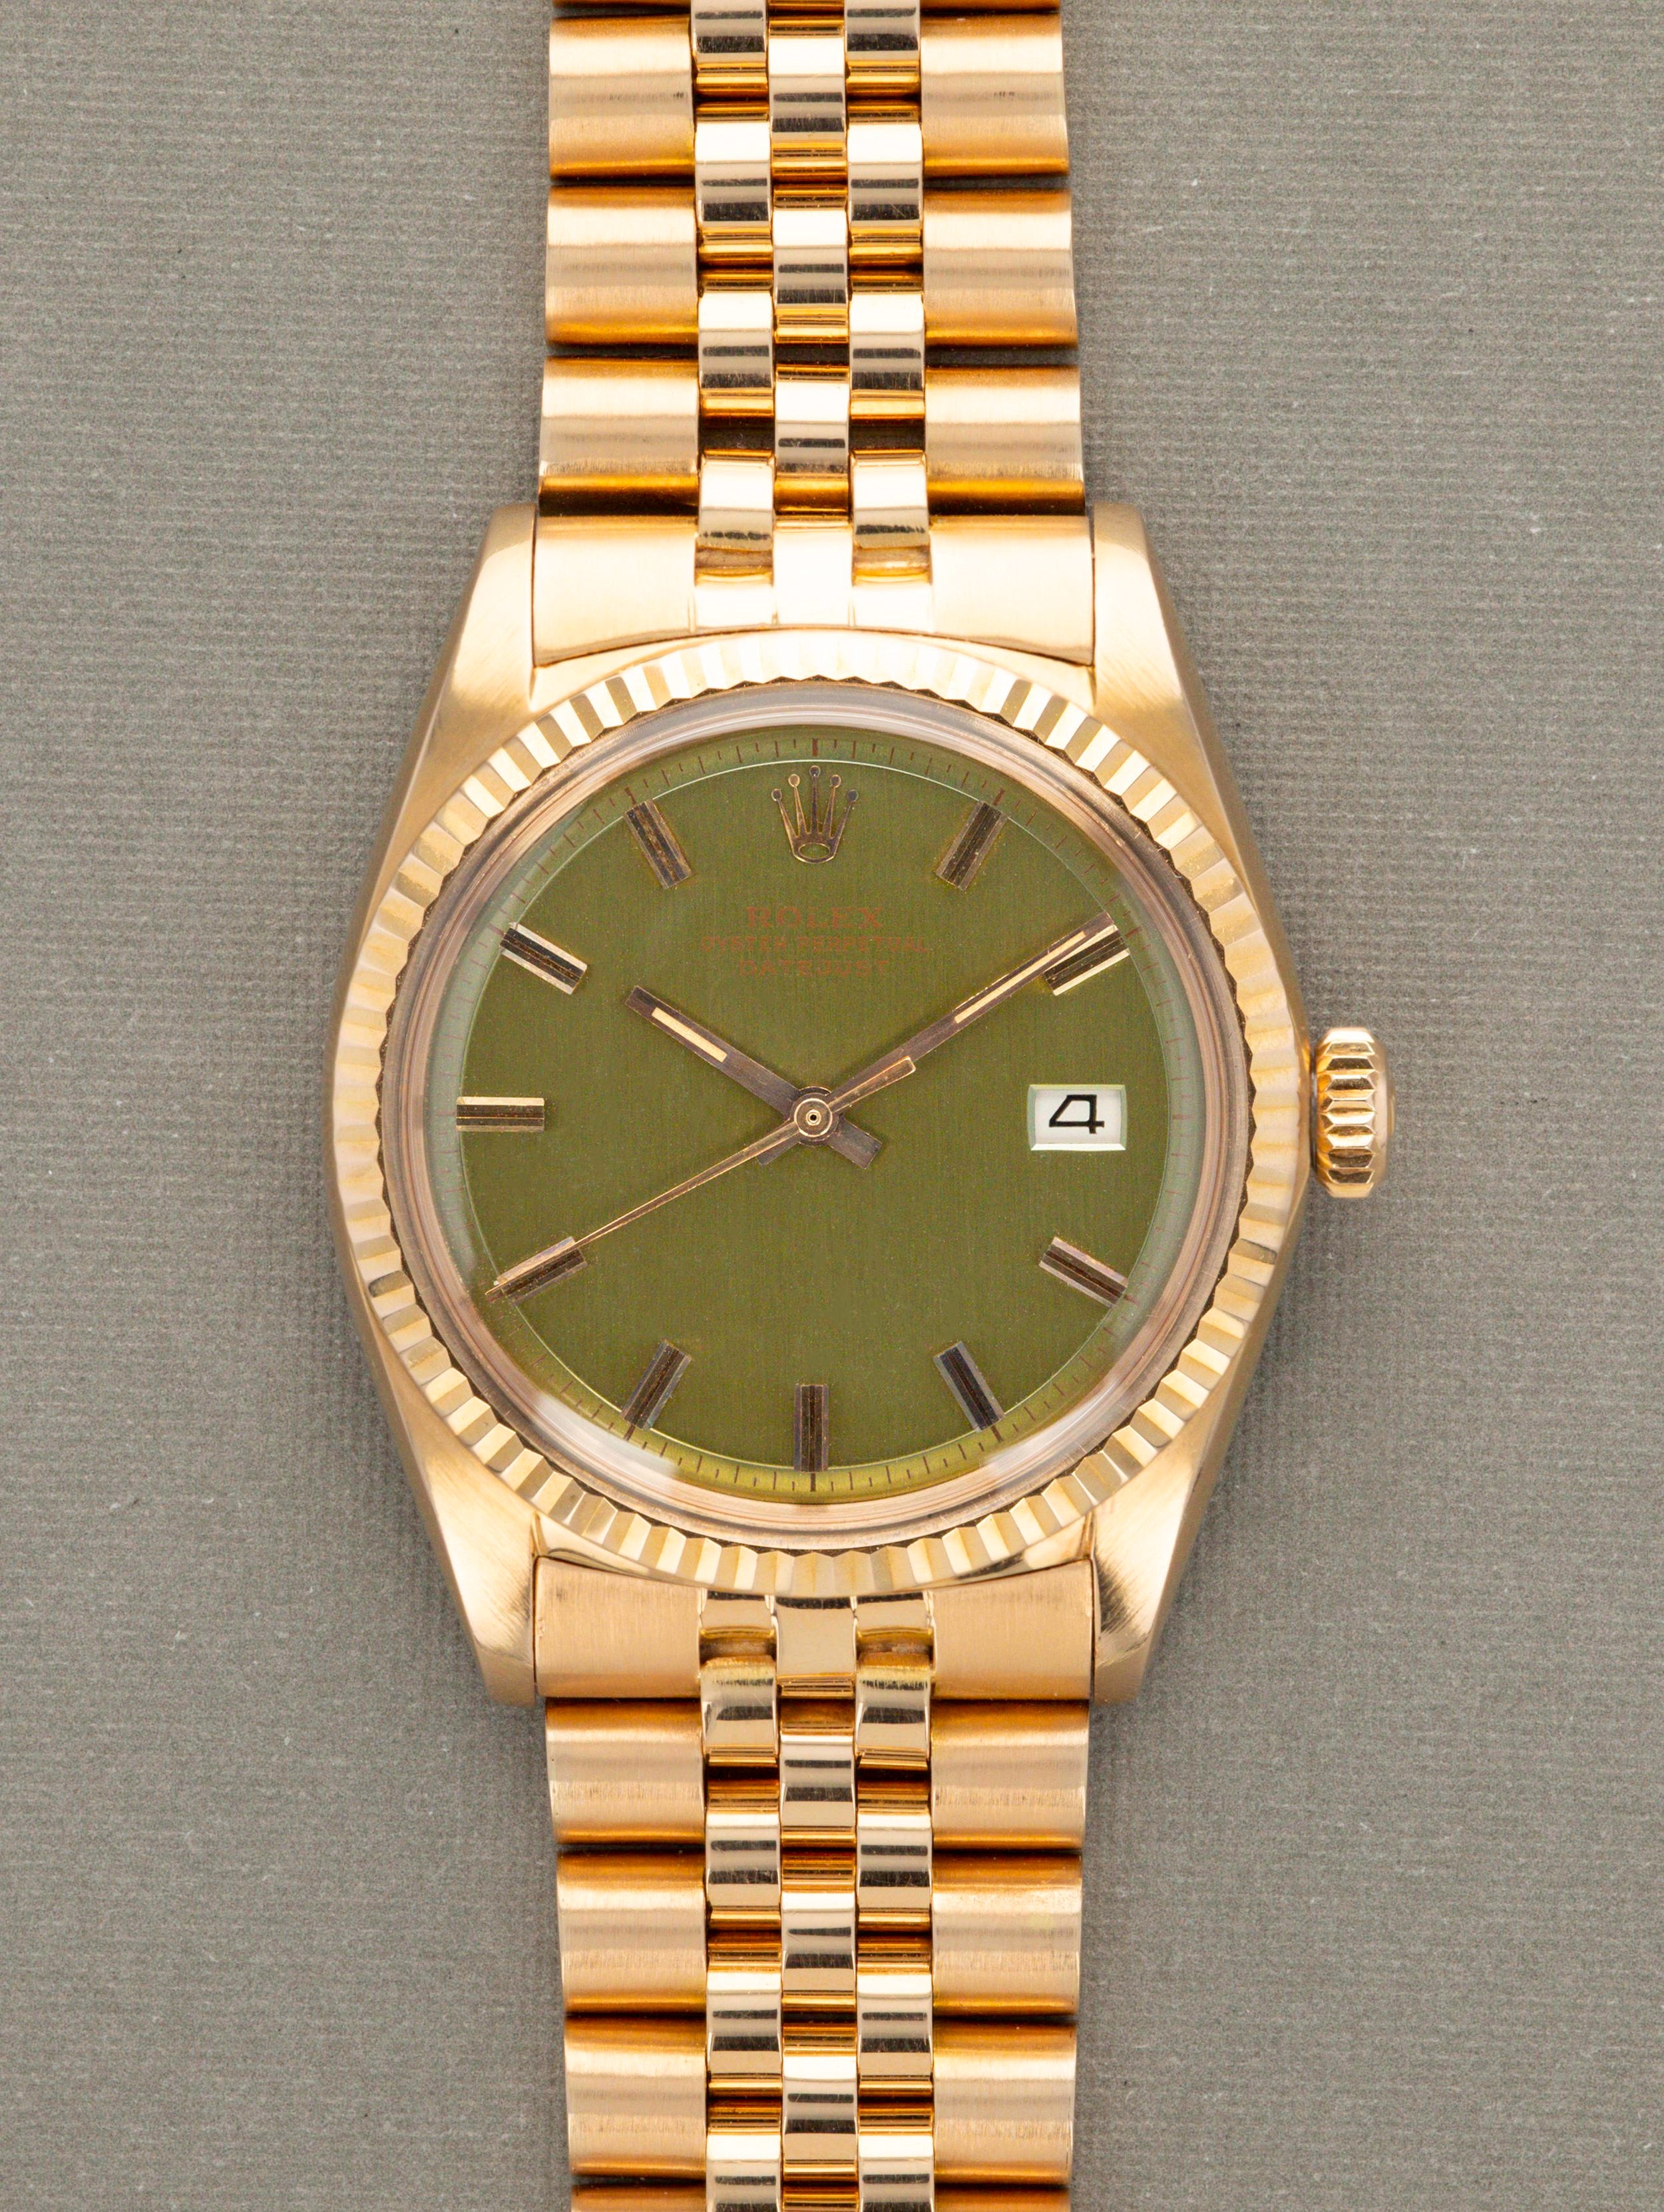 Rolex Datejust Ref. 1601/8 - Rose Gold w/ Prototype Olive Green Dial